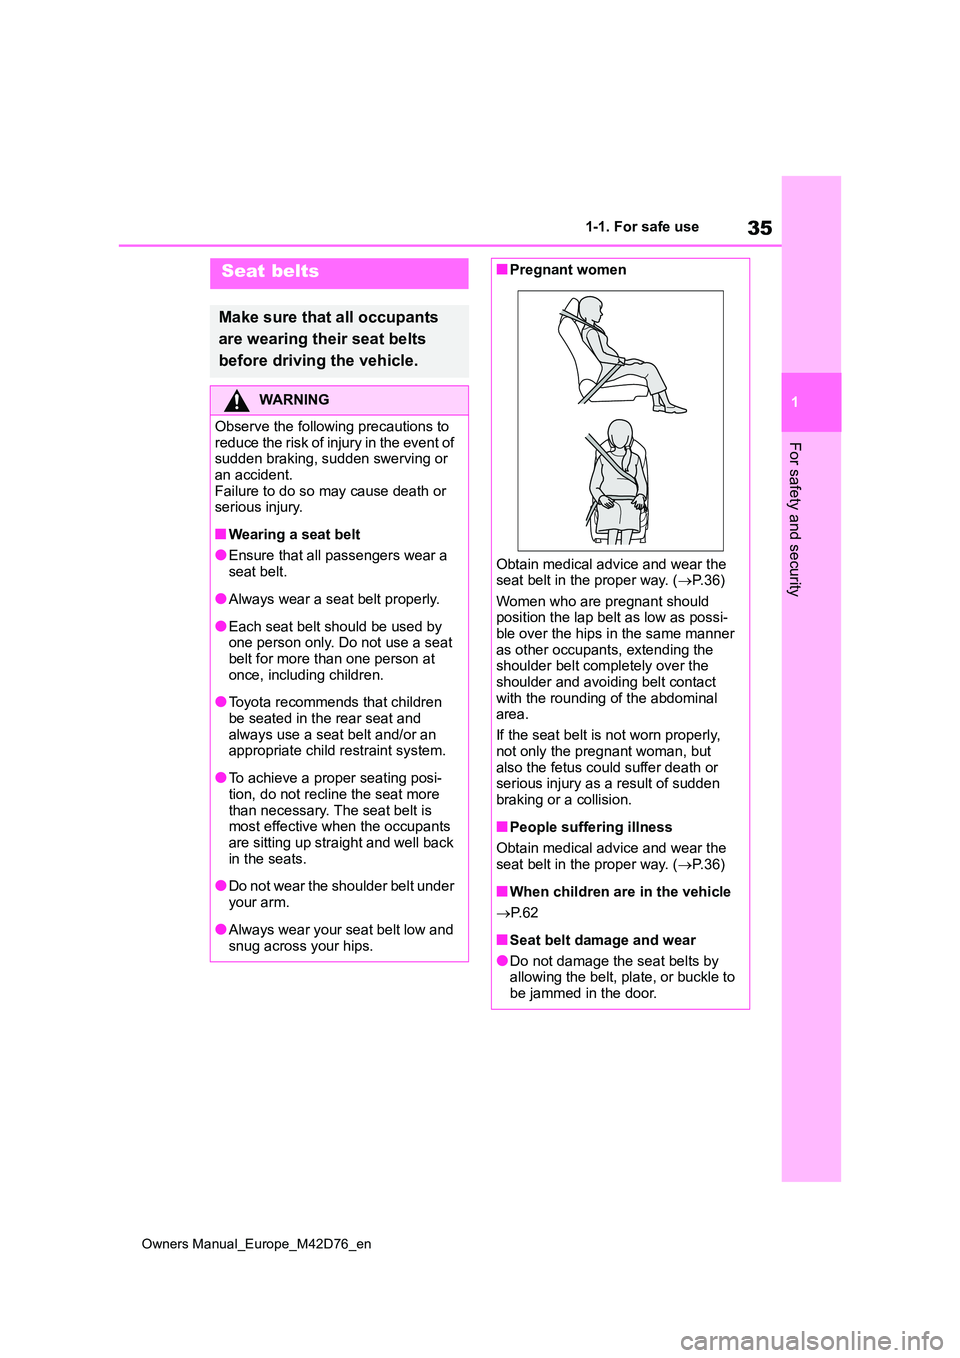 TOYOTA BZ4X 2022  Owners Manual (in English) 35
1
Owners Manual_Europe_M42D76_en
1-1. For safe use
For safety and security
Seat belts
Make sure that all occupants  
are wearing their seat belts  
before driving the vehicle.
WARNING
Observe the f